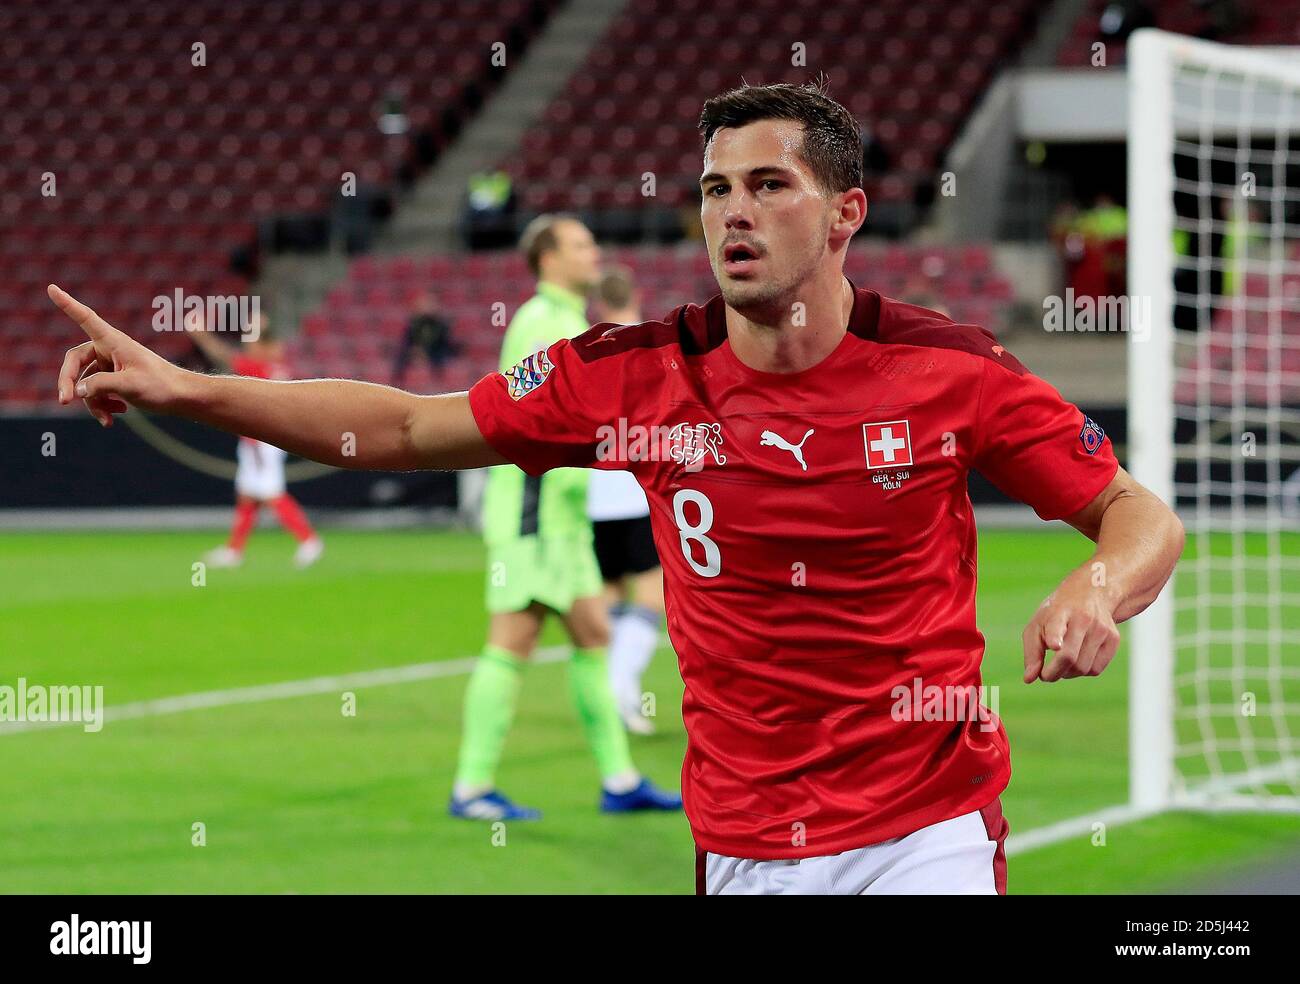 Cologne. 14th Oct, 2020. Remo Freuler of Switzerland celebrates after scoring during the UEFA Nations League match against Germany in Cologne, Germany, Oct. 13, 2020. Credit: Xinhua/Alamy Live News Stock Photo